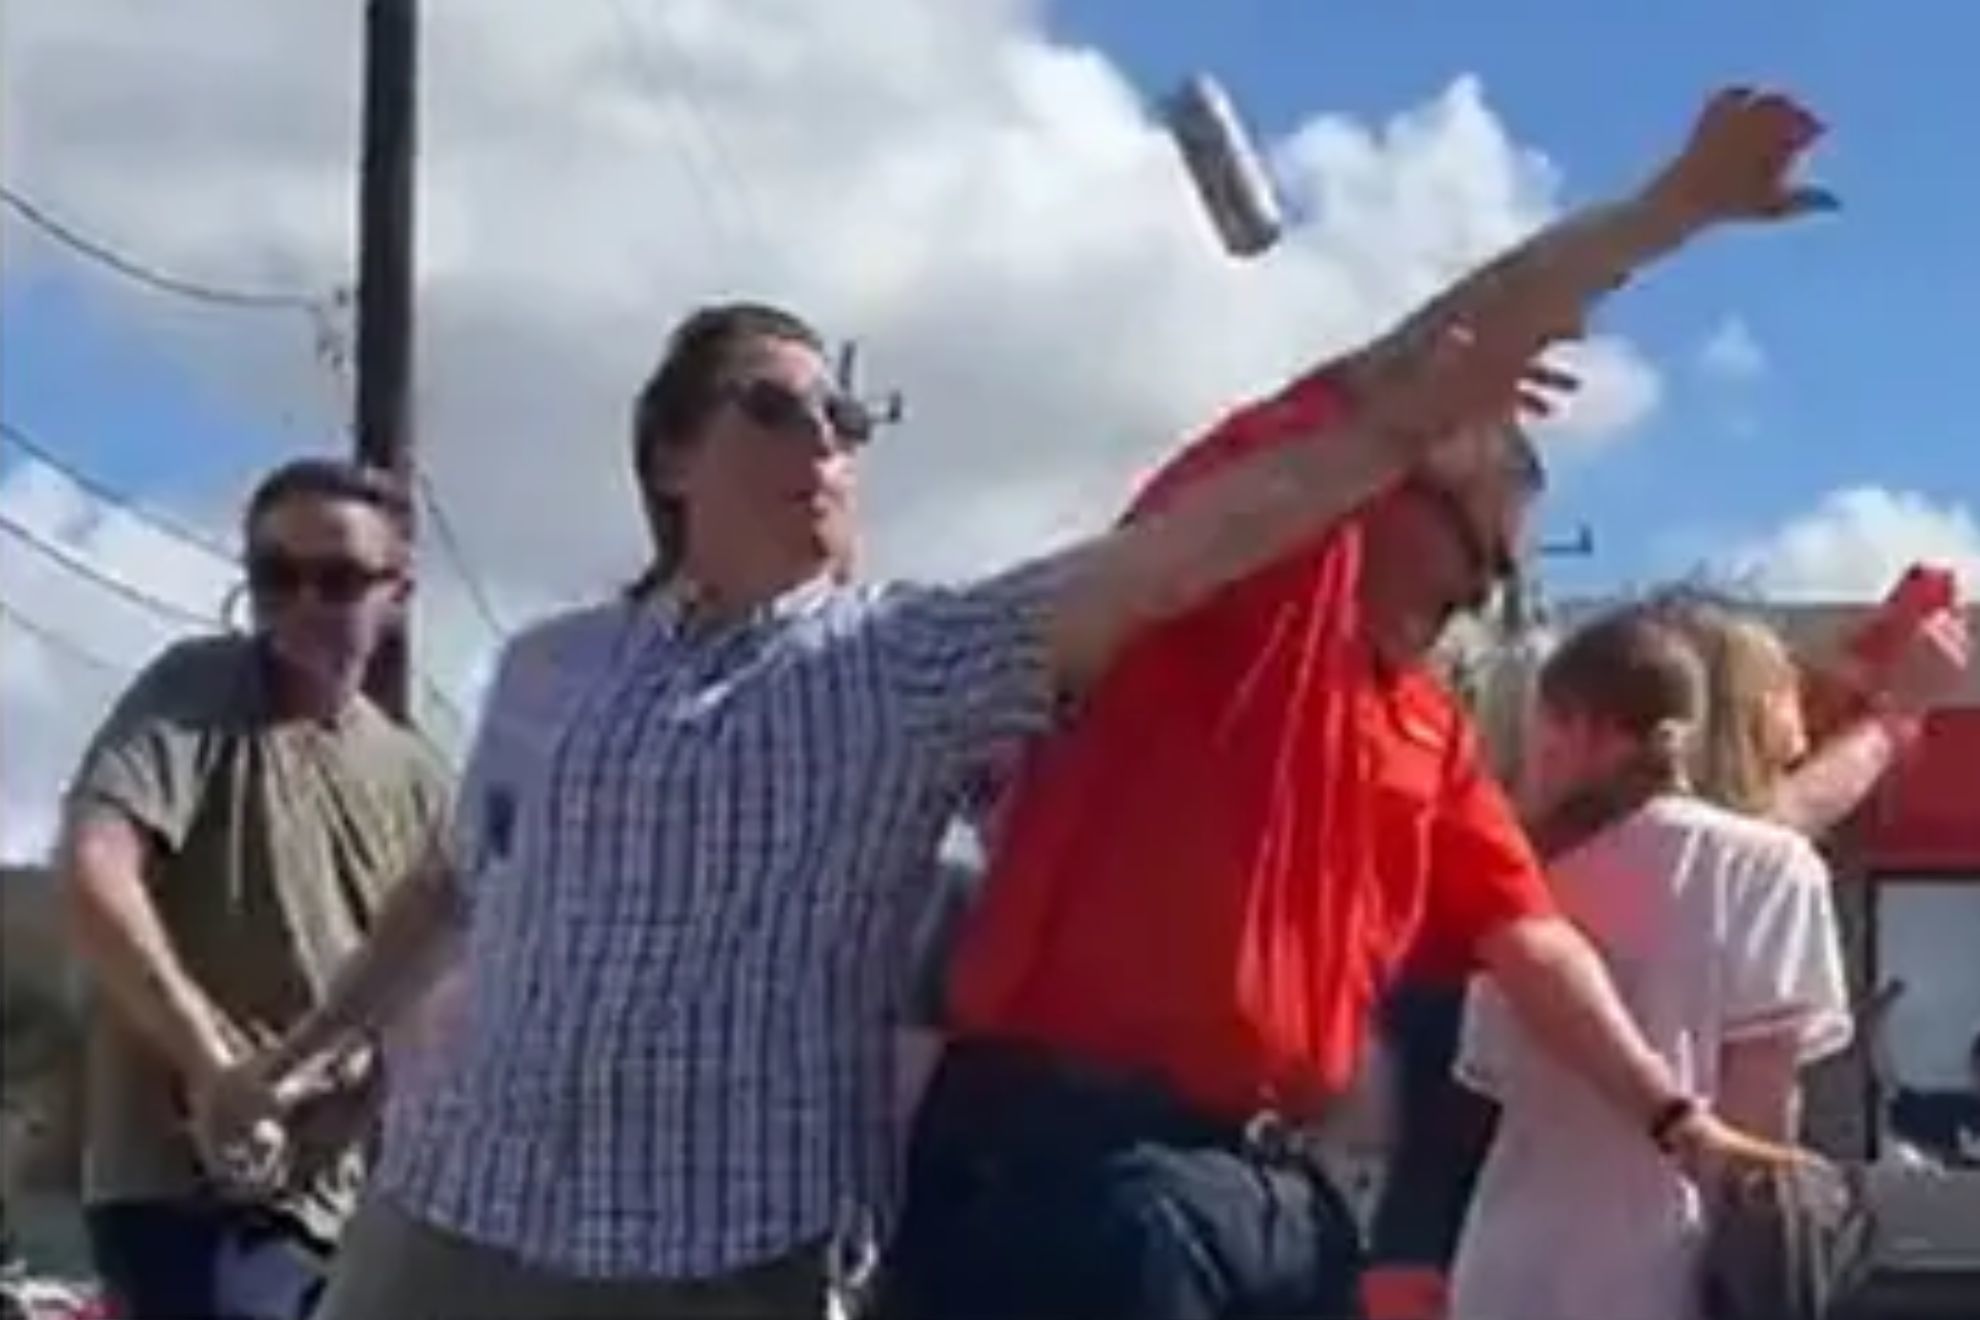 Ted Cruz hit by beer can at Houston Astros MLB World Series championship parade